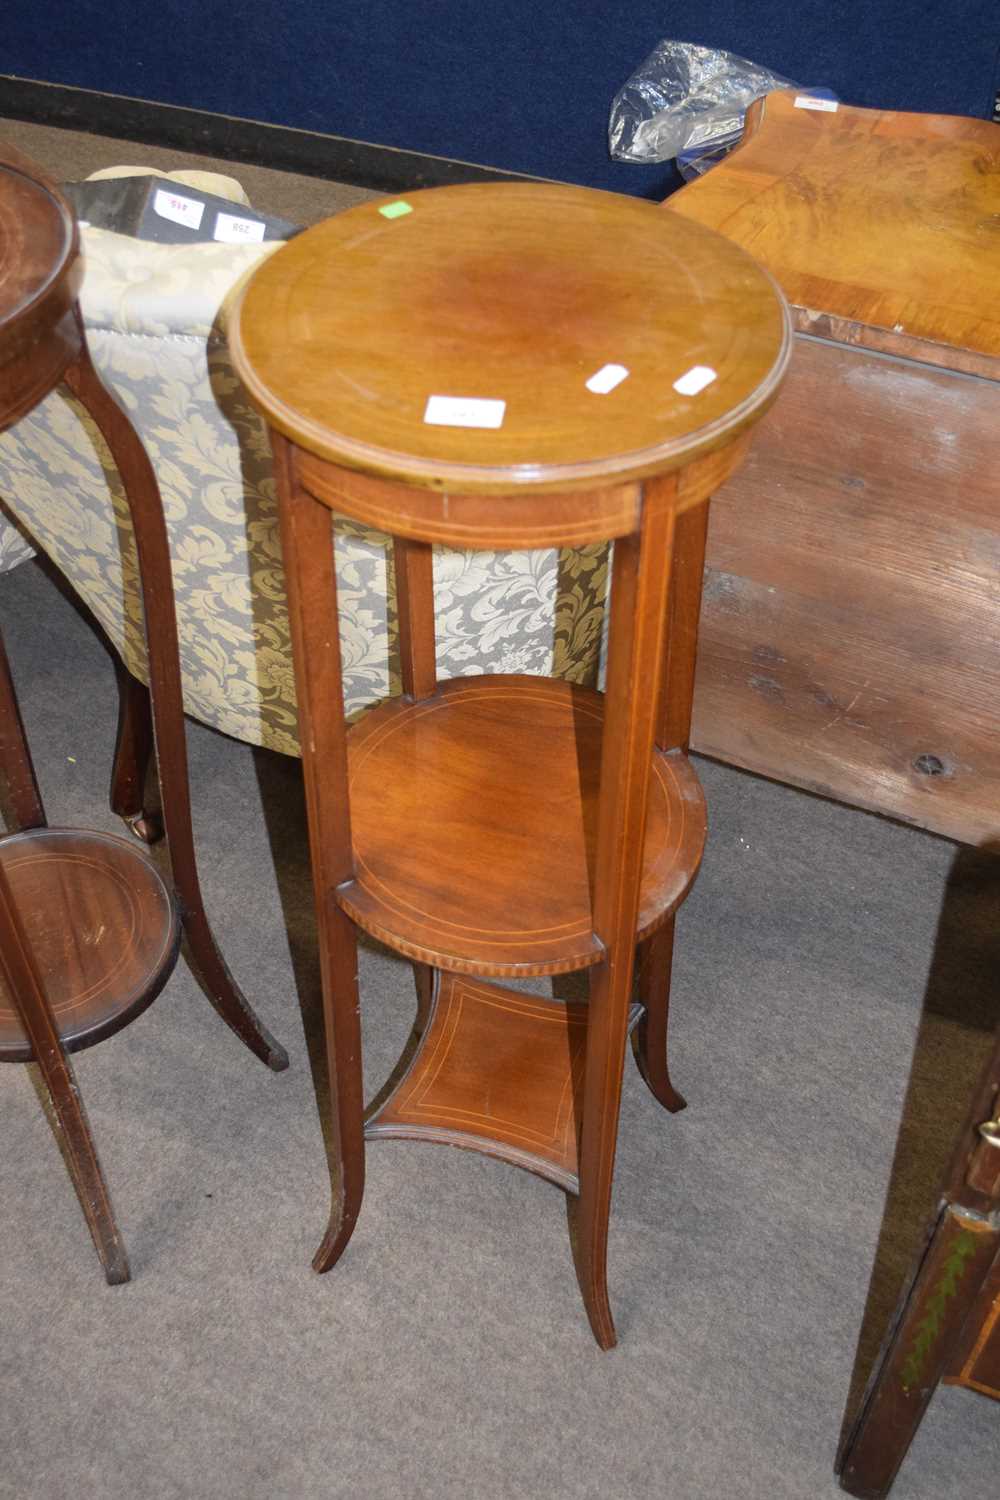 Edwardian mahogany and inlaid circular three tier plant stand raised on outswept legs, 94cm high